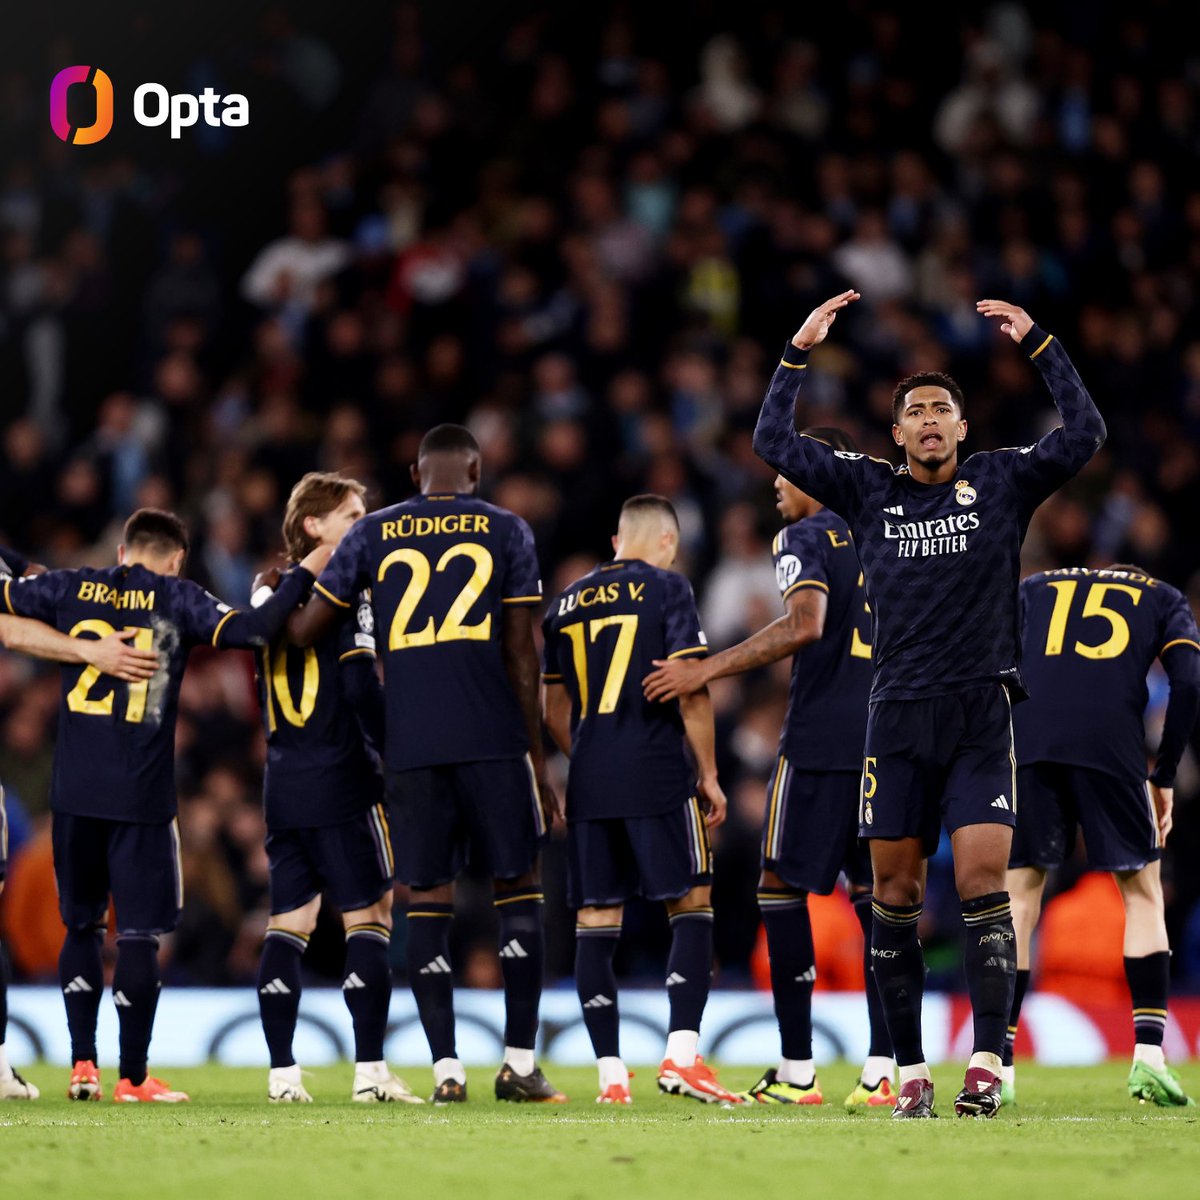 6 - Real Madrid have eliminated the reigning UEFA Champions League title-holders six times in knockout ties - at least twice as often as any other side in the competition's history. Authority.